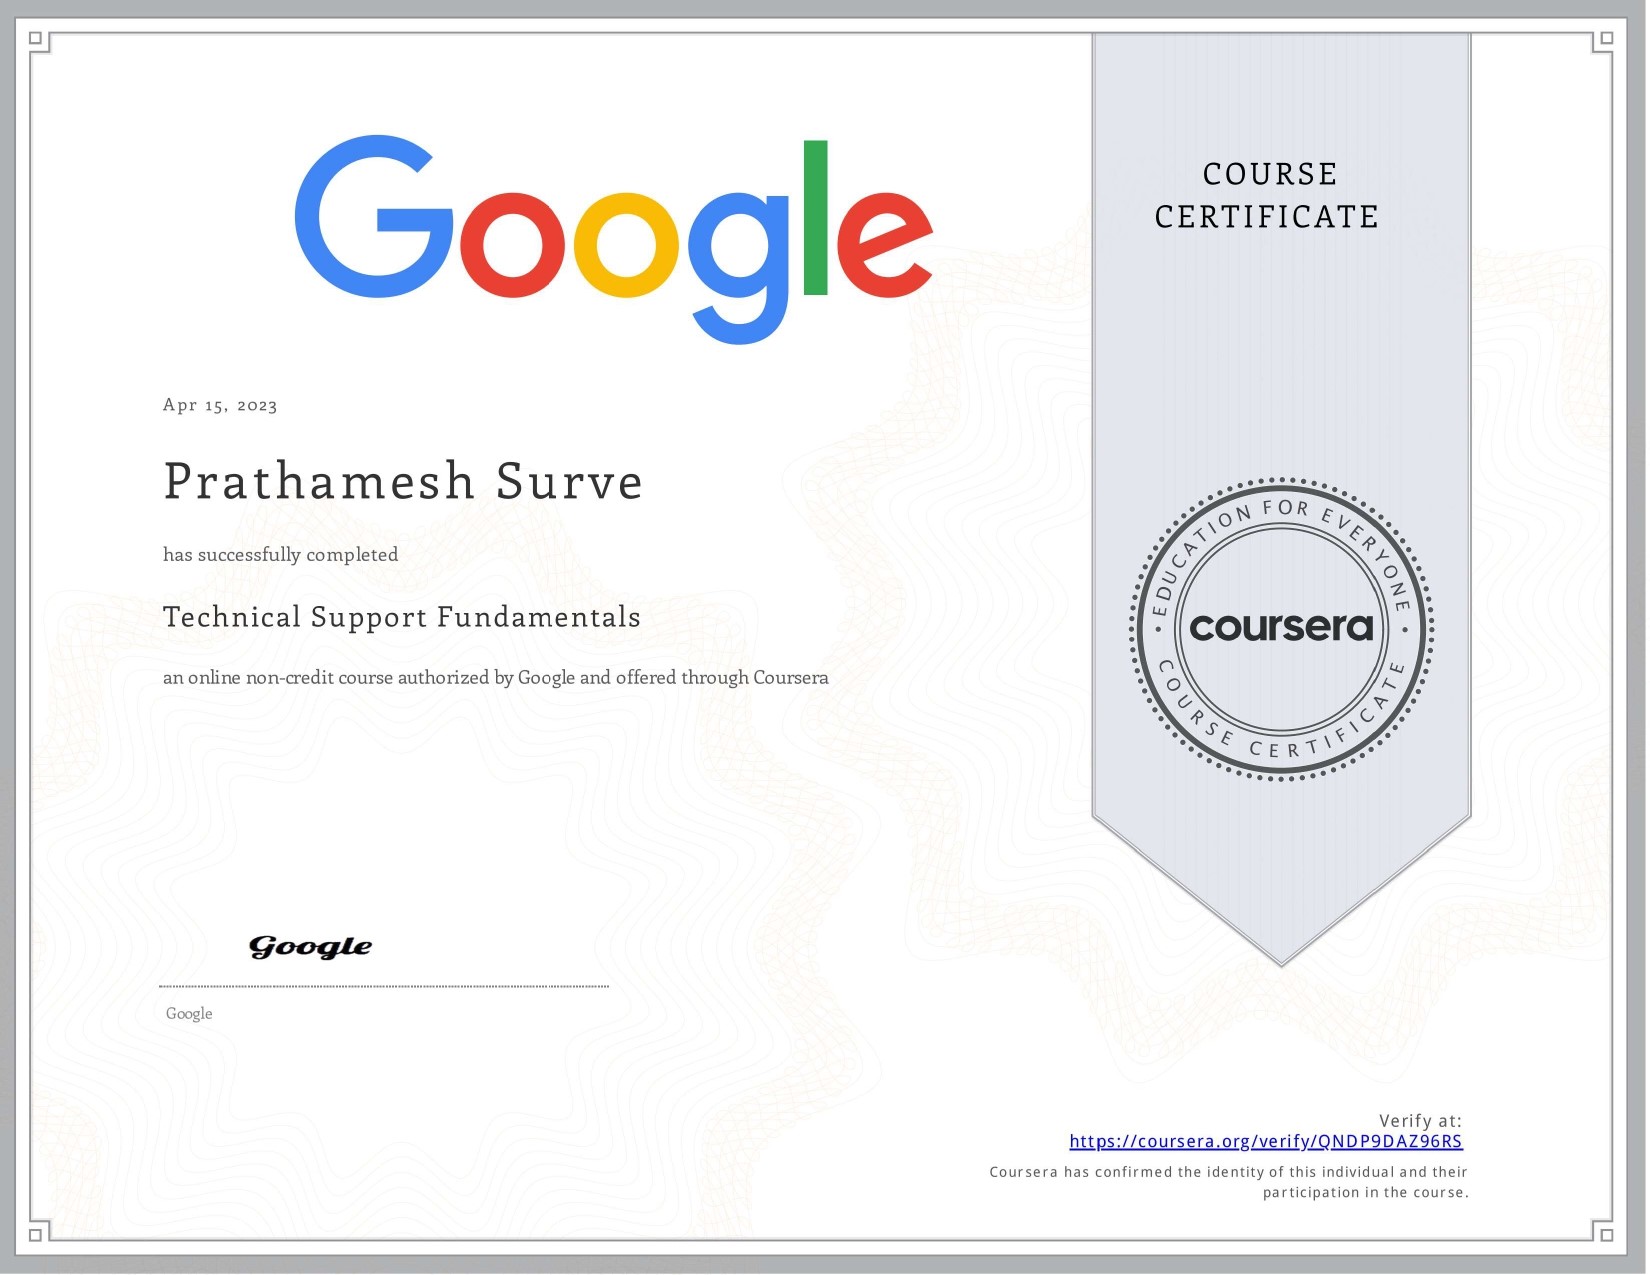 Technical Support Fundamentals by Google Certificate by Coursera